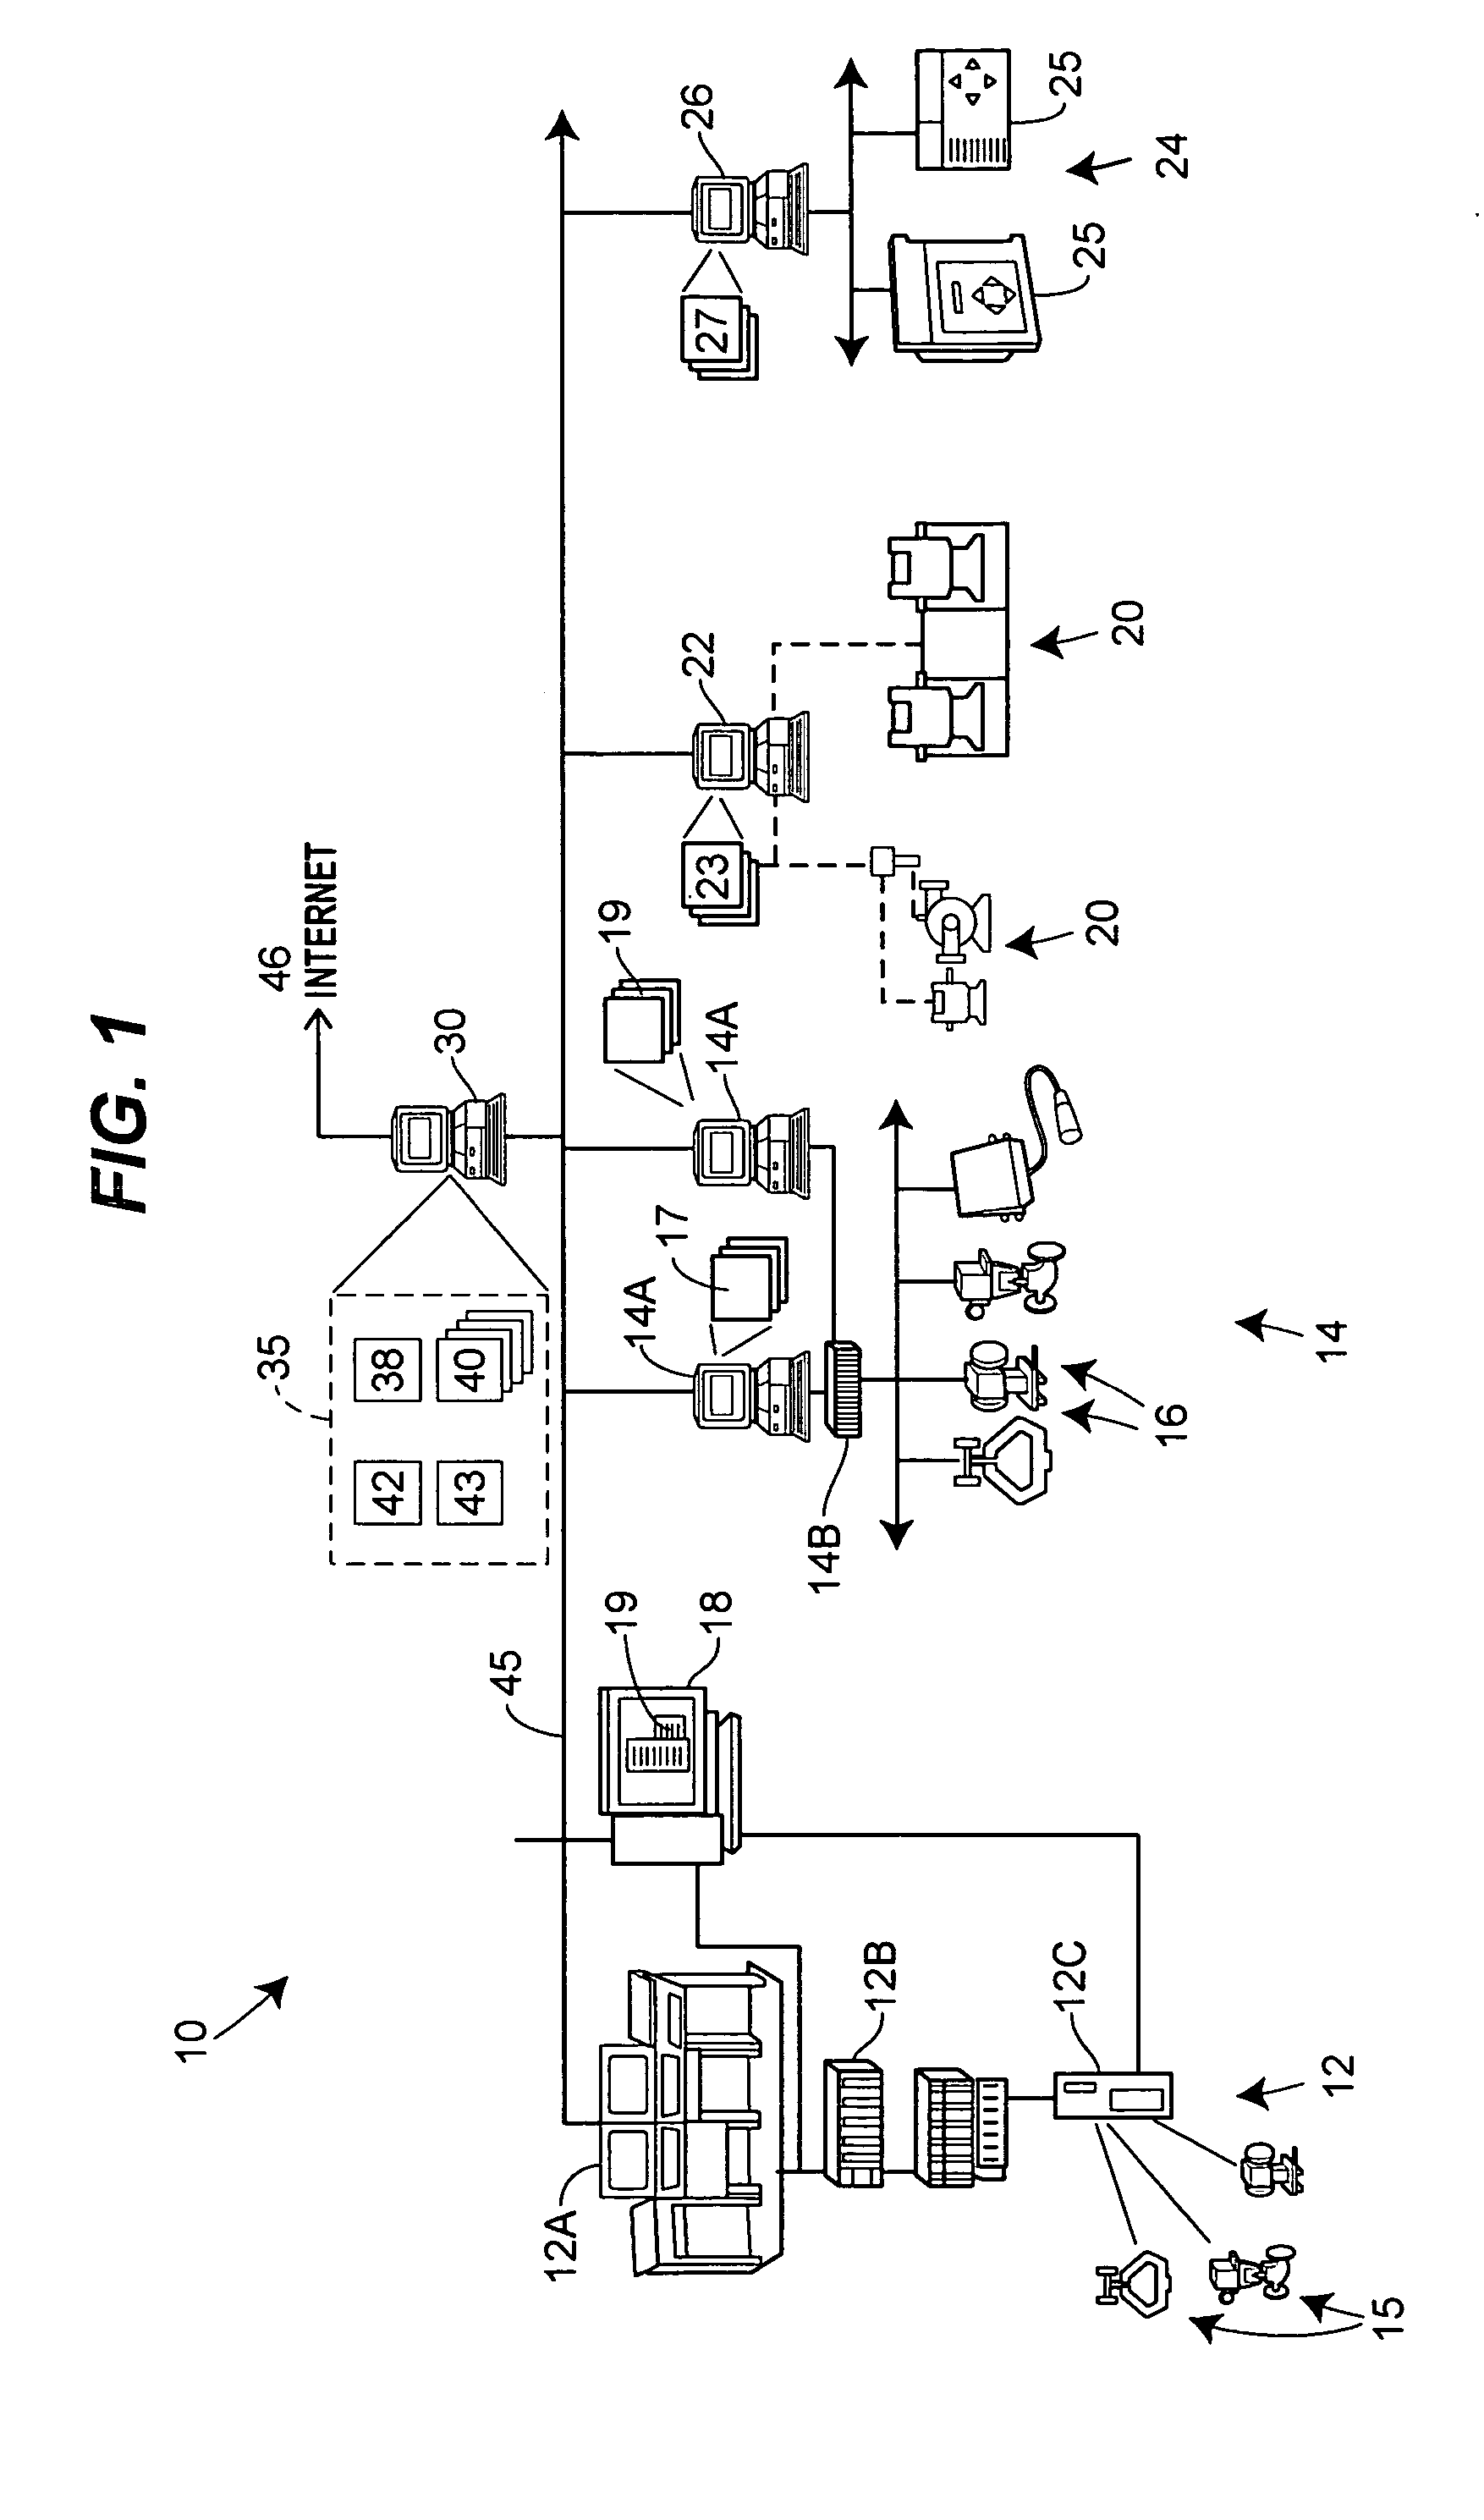 Data presentation system for abnormal situation prevention in a process plant